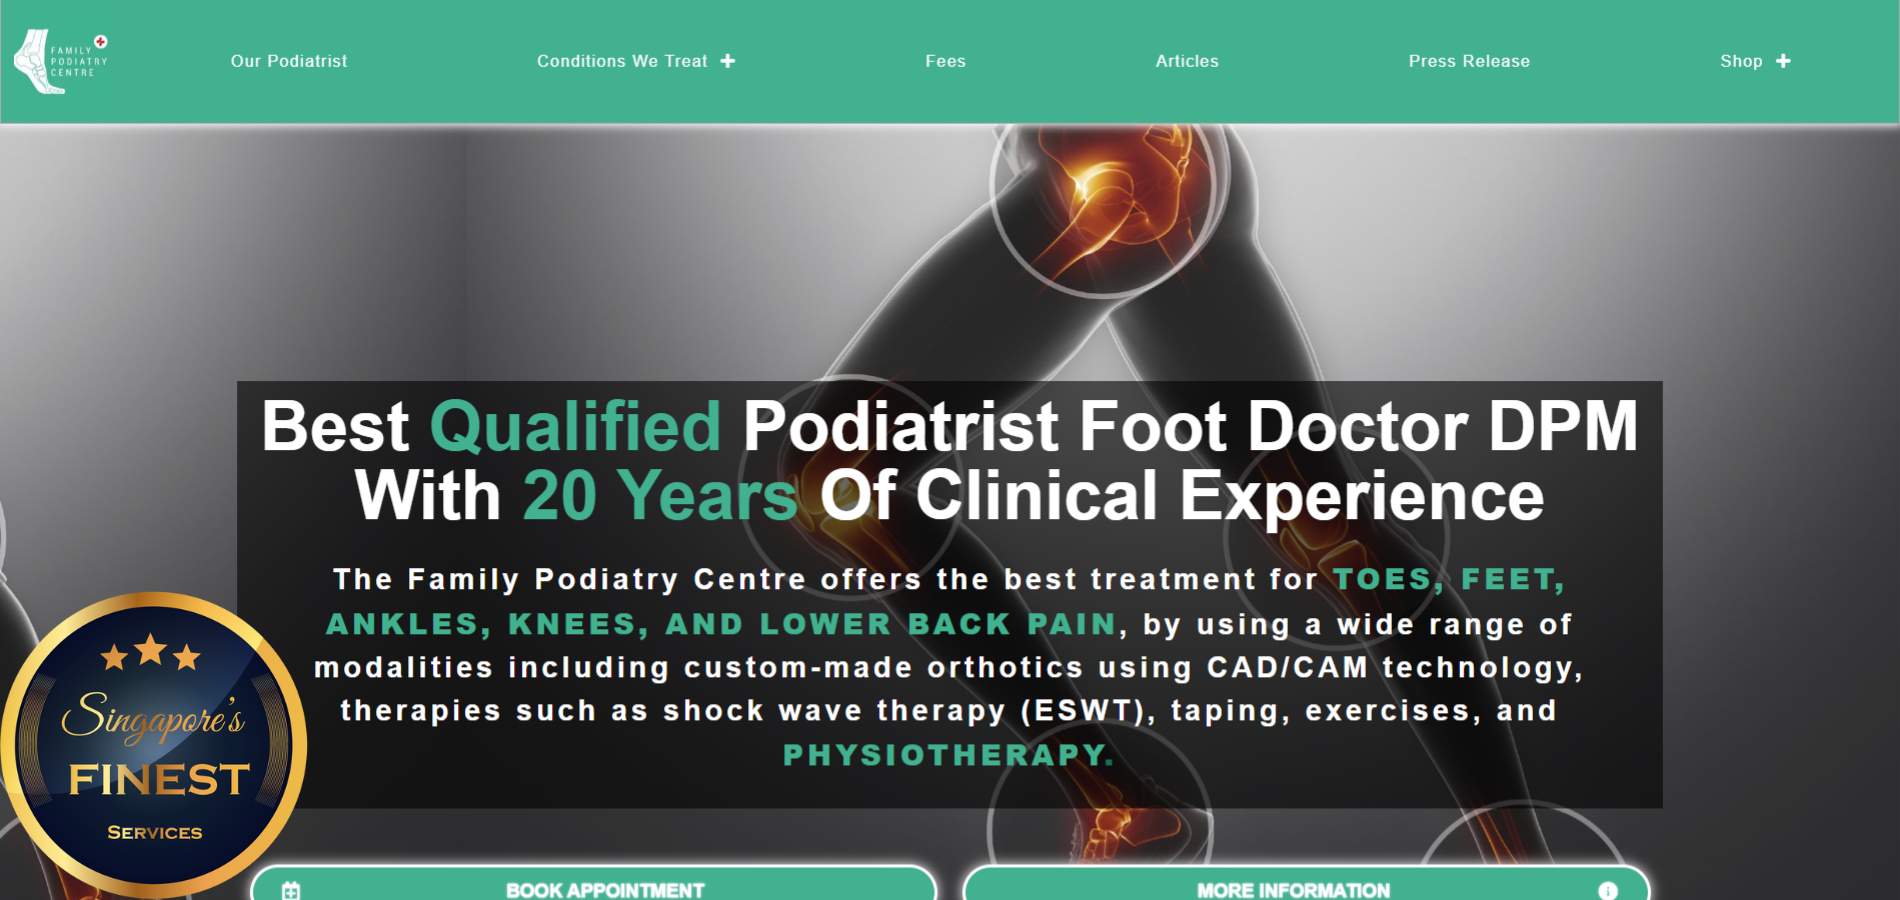 The Finest Podiatrists and Podiatry Clinics in Singapore